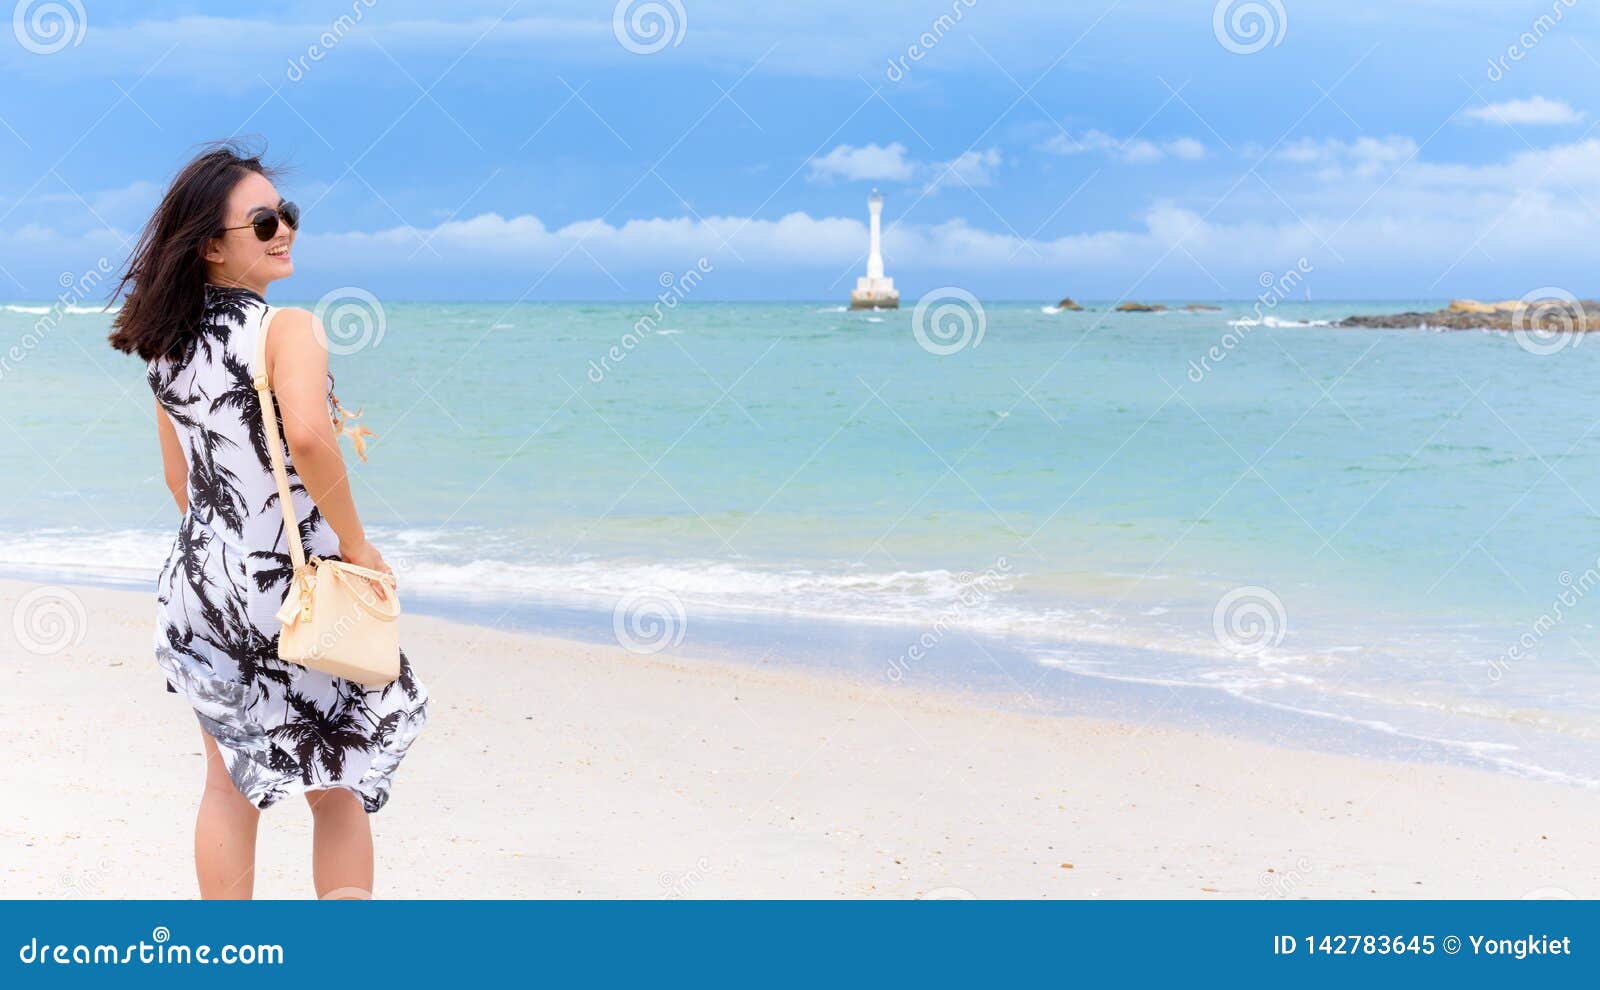 Woman Tourist on the Beach in Thailand Stock Image - Image of person ...